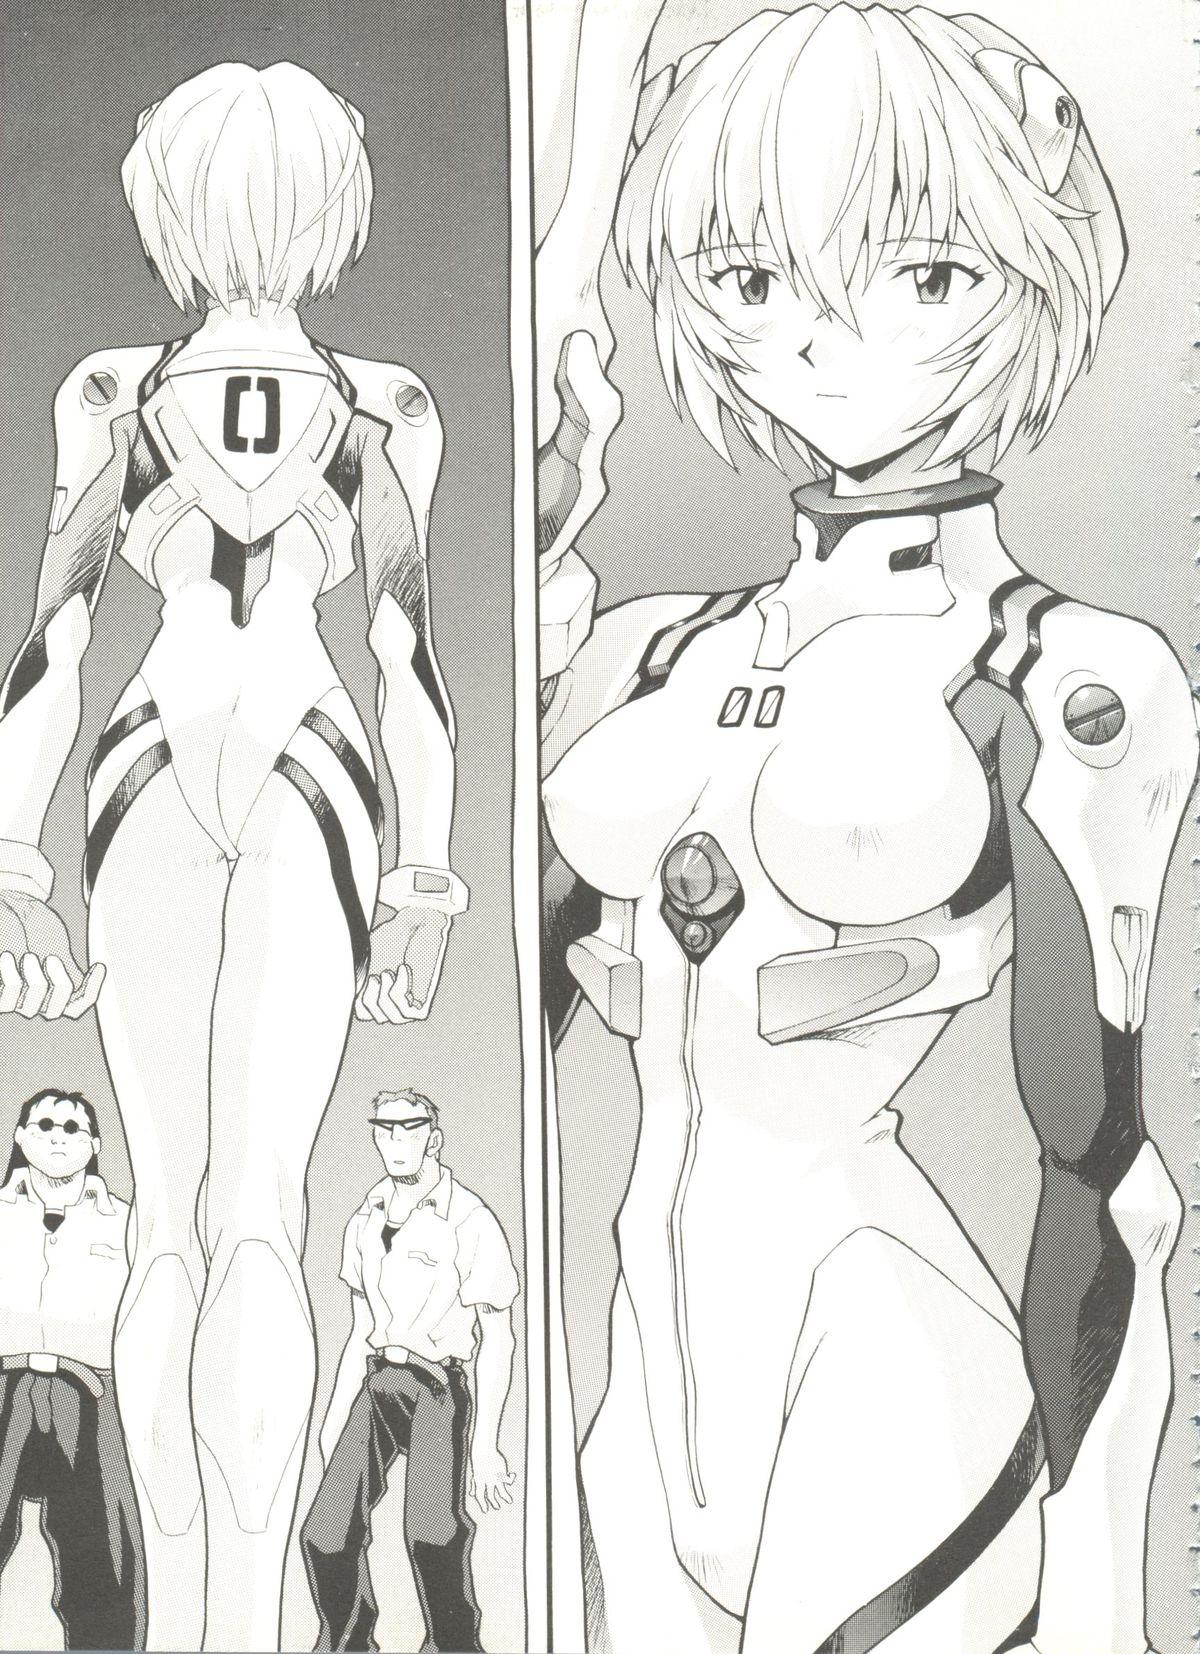 Handsome Aniparo Miki 15 - Neon genesis evangelion Sailor moon Martian successor nadesico Magic knight rayearth Saber marionette Knights of ramune Kero kero chime Tiny Tits Porn - Page 9